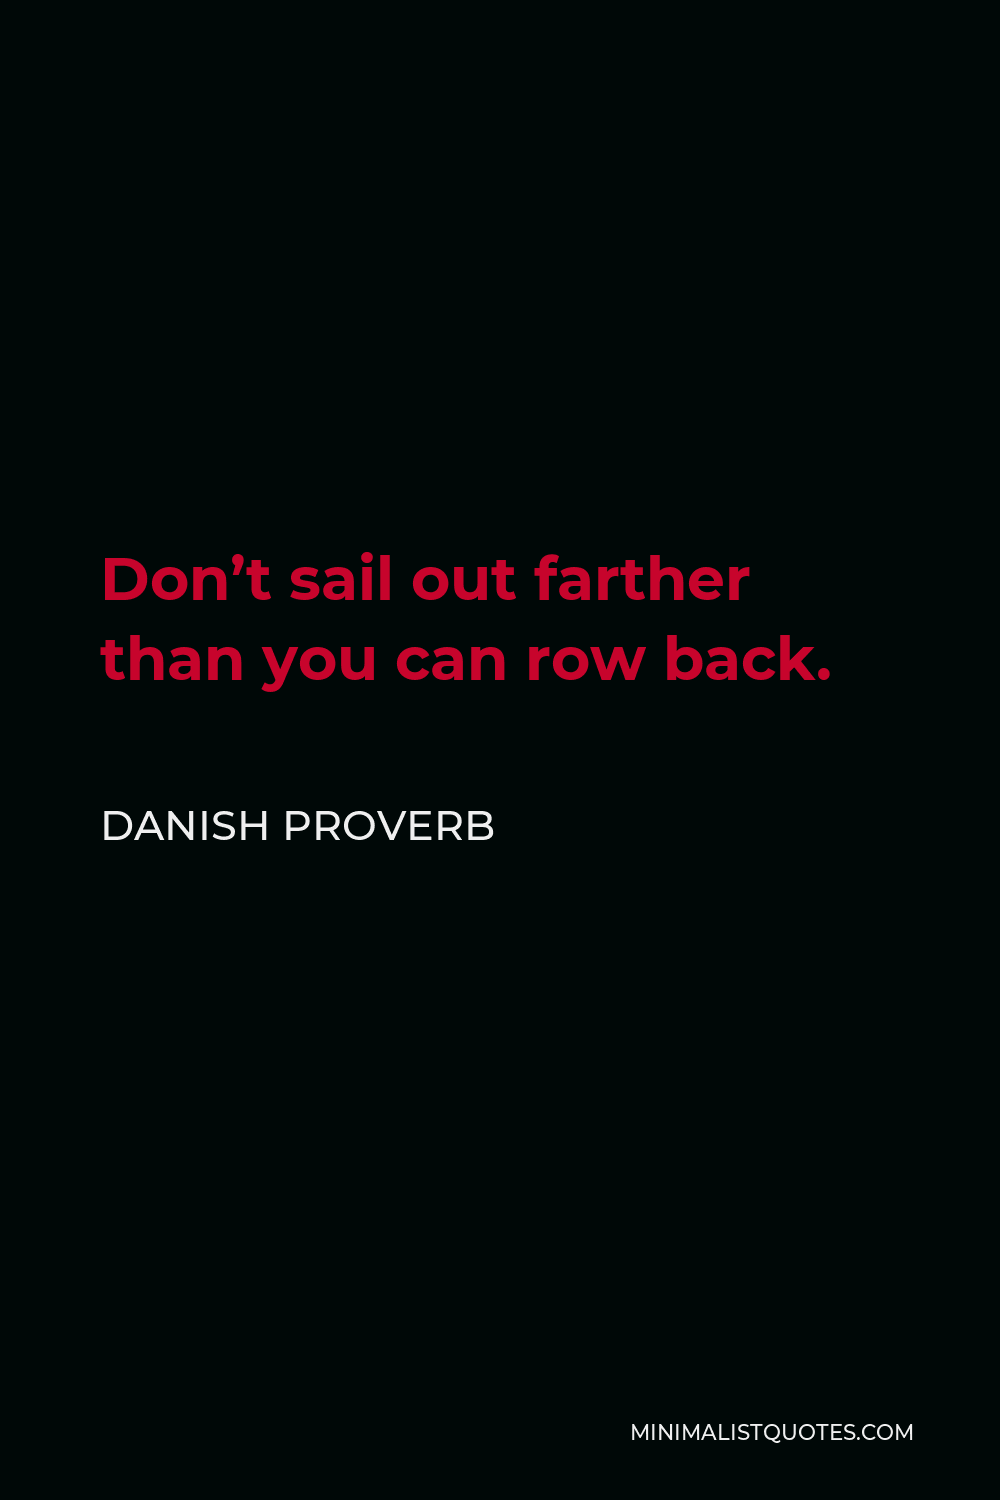 Danish Proverb Quote - Don’t sail out farther than you can row back.